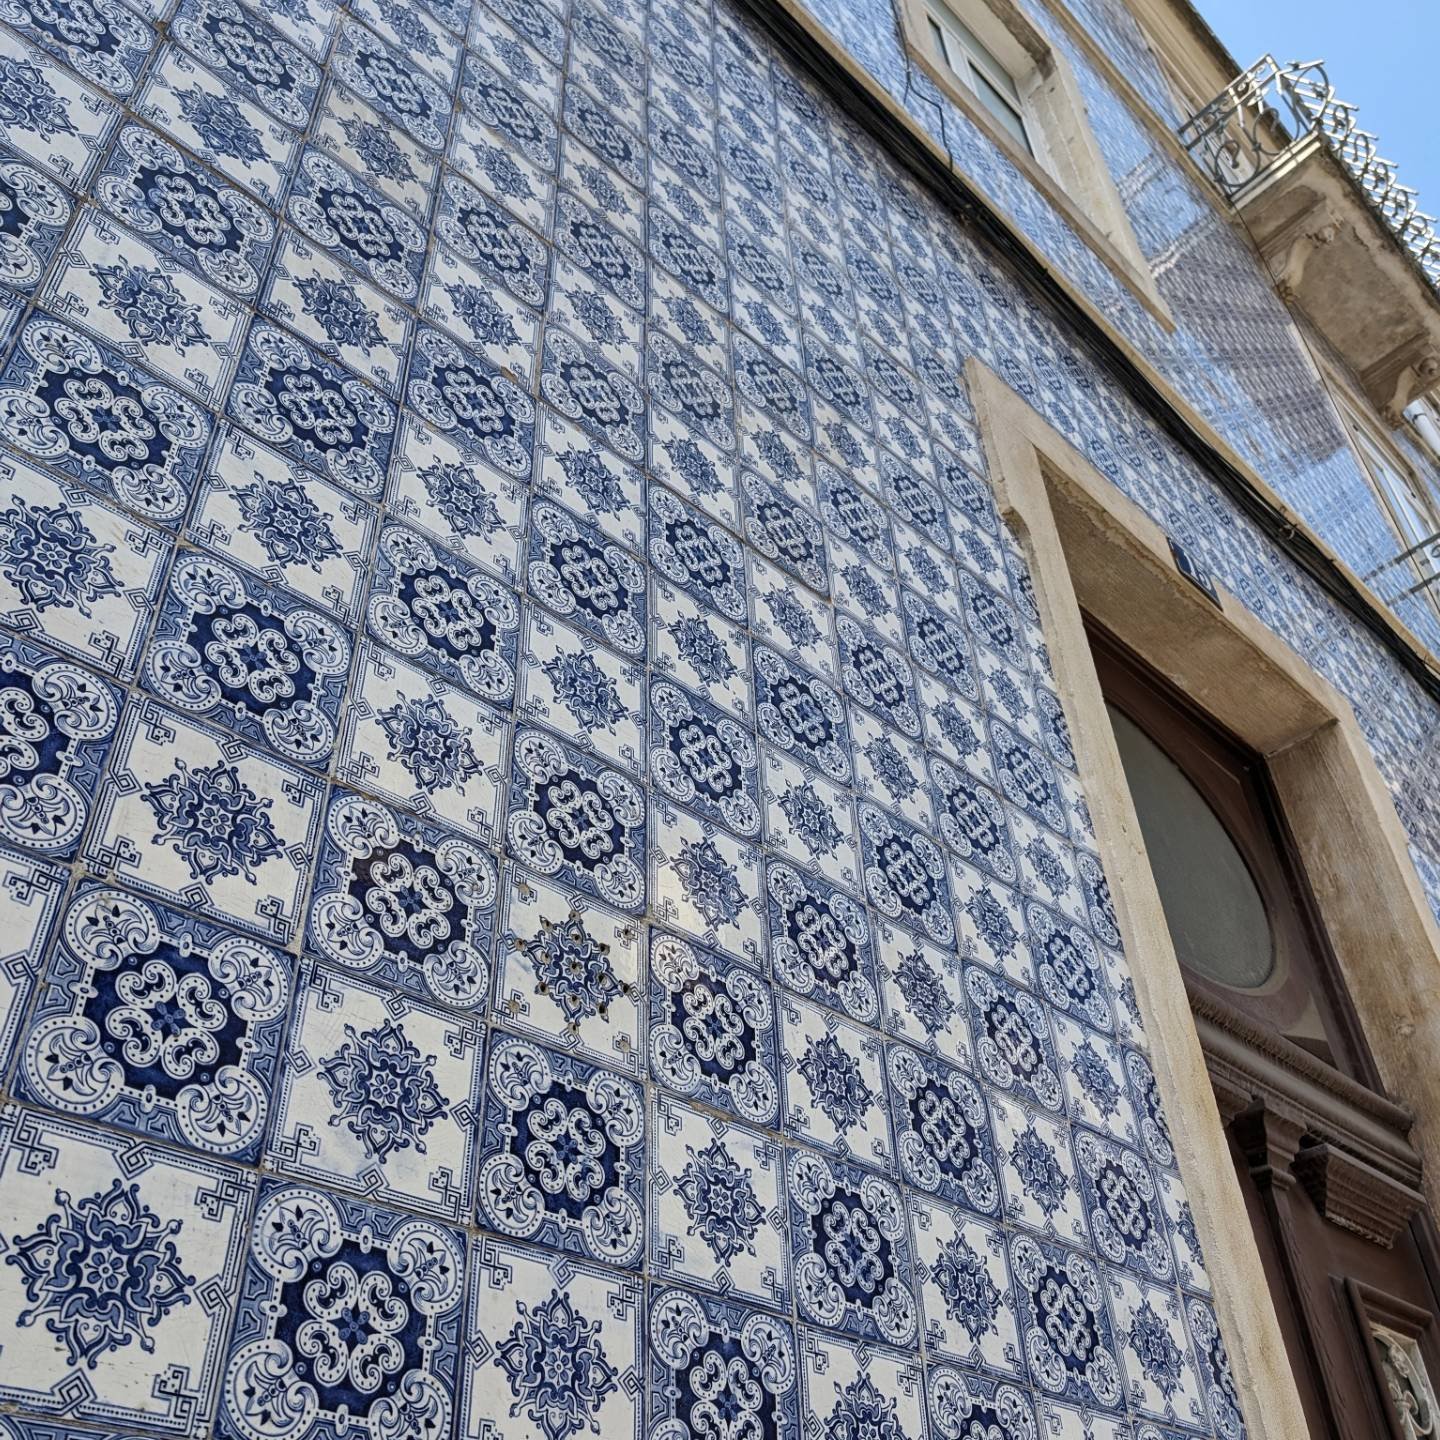 Just falling in love with the colours and hand-painter tile art of Lisbon ❤️

#lisbon #portugal #lisboa #travel #visitportugal #lisbonne #lisbonlovers #europe #photography #visitlisbon #lisbonportugal #travelphotography #lissabon #lisbona #ig #pt #am